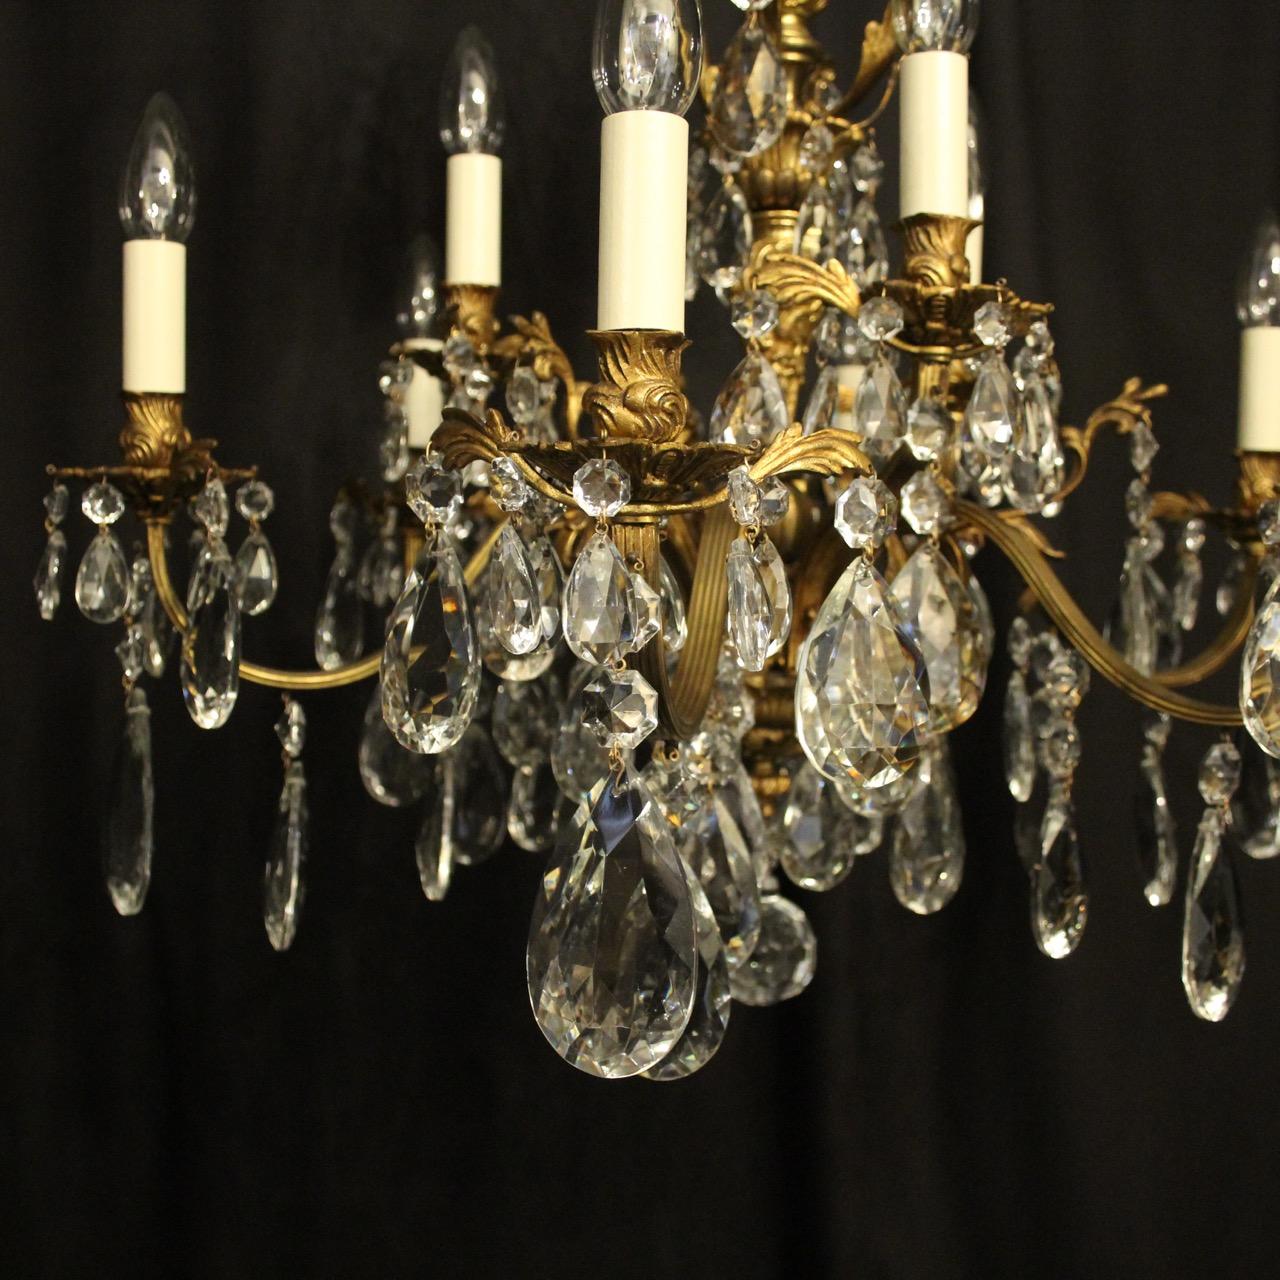 An Italian gilded bronze and crystal 12 light double tiered antique chandelier, the acanthus leaf scrolling arms with leaf bobeche drip pans and bulbous candle sconces, issuing from an ornately cast central column with leaf canopy, decorated overall